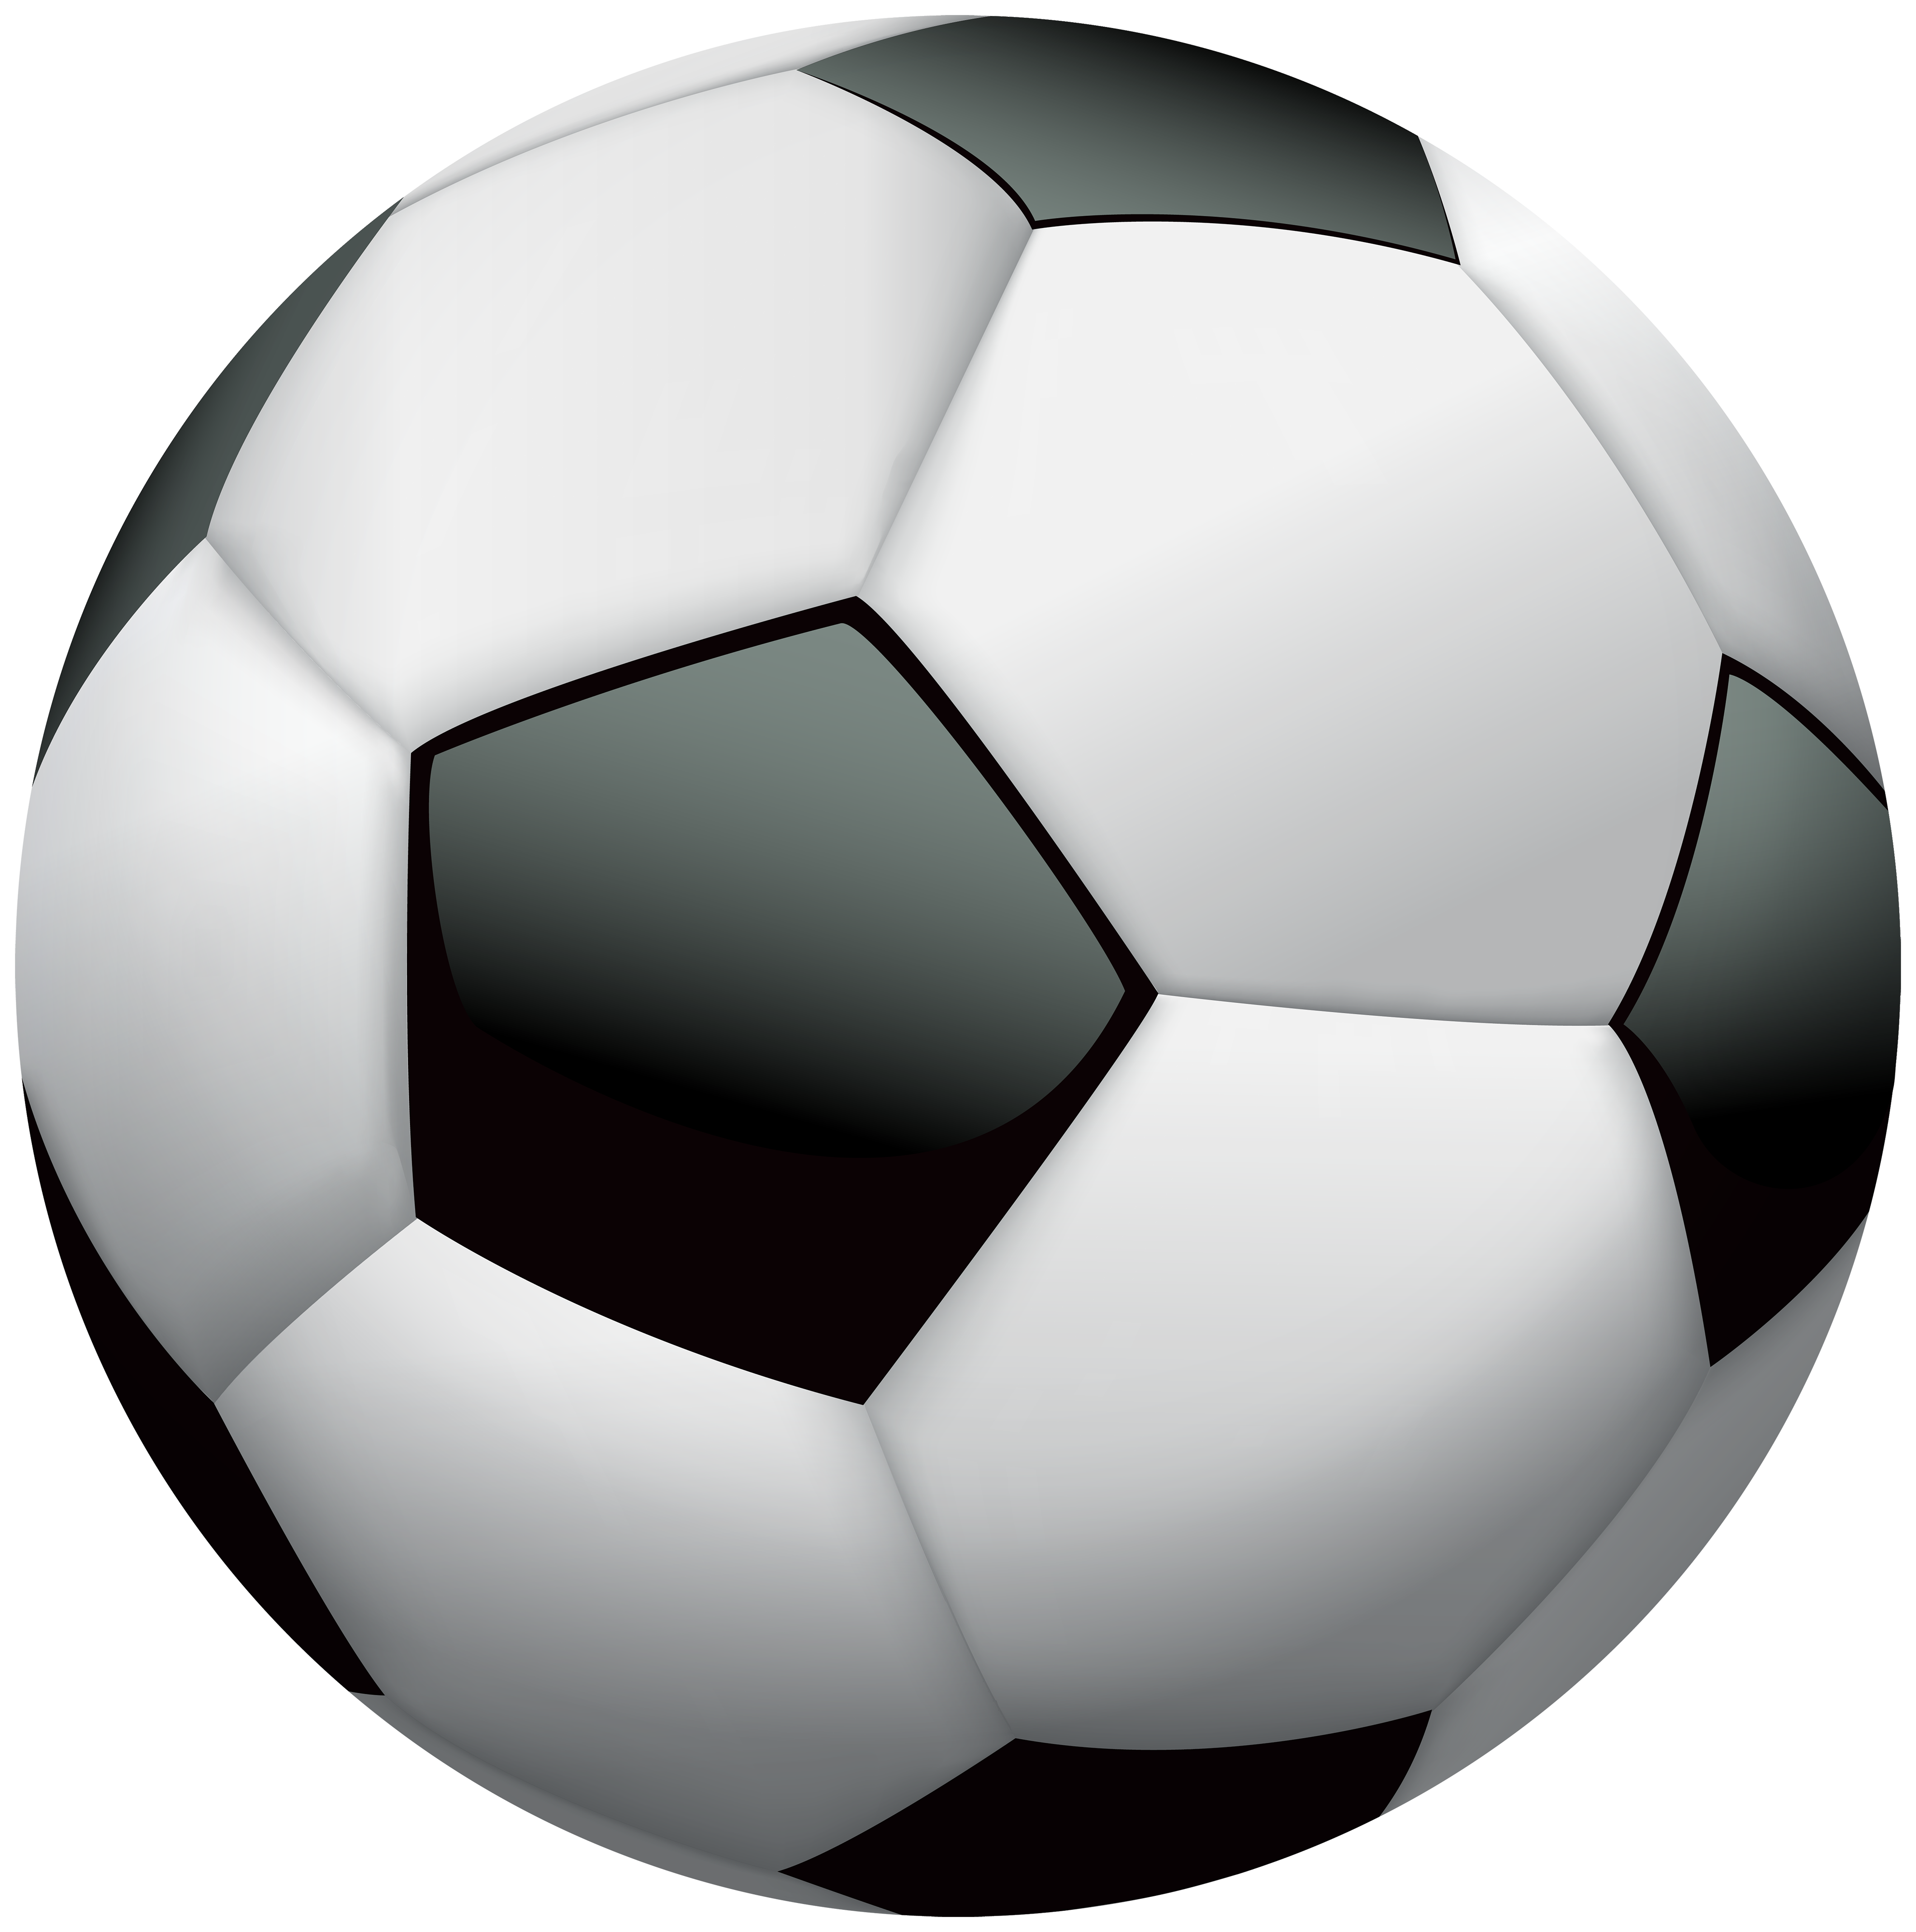 free clipart images of soccer balls - photo #38